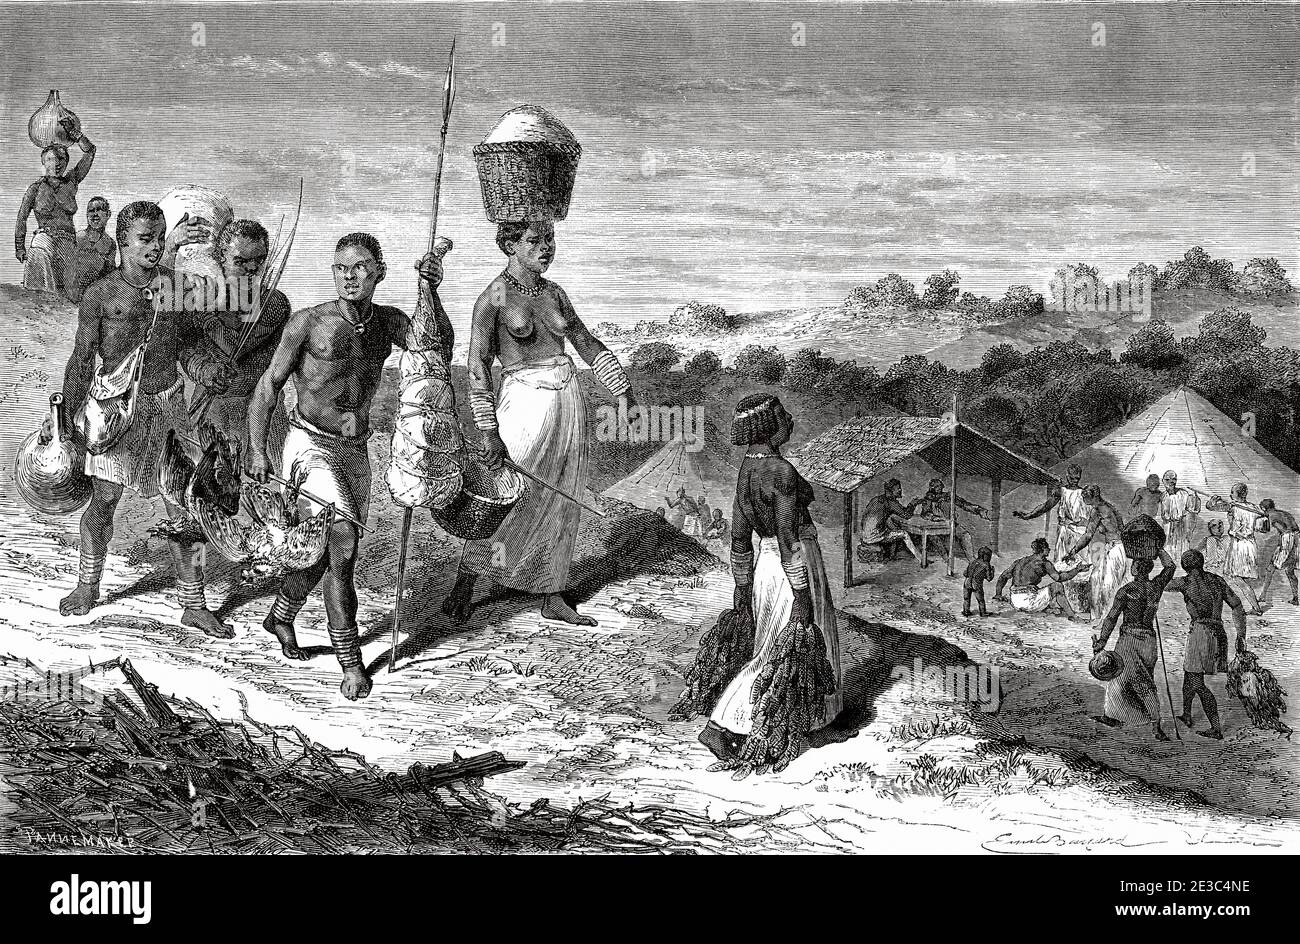 Natives African carrying food supplies in the village, Tanzania, Africa. Old XIX century engraved from Le Tour du Monde 1864 Stock Photo